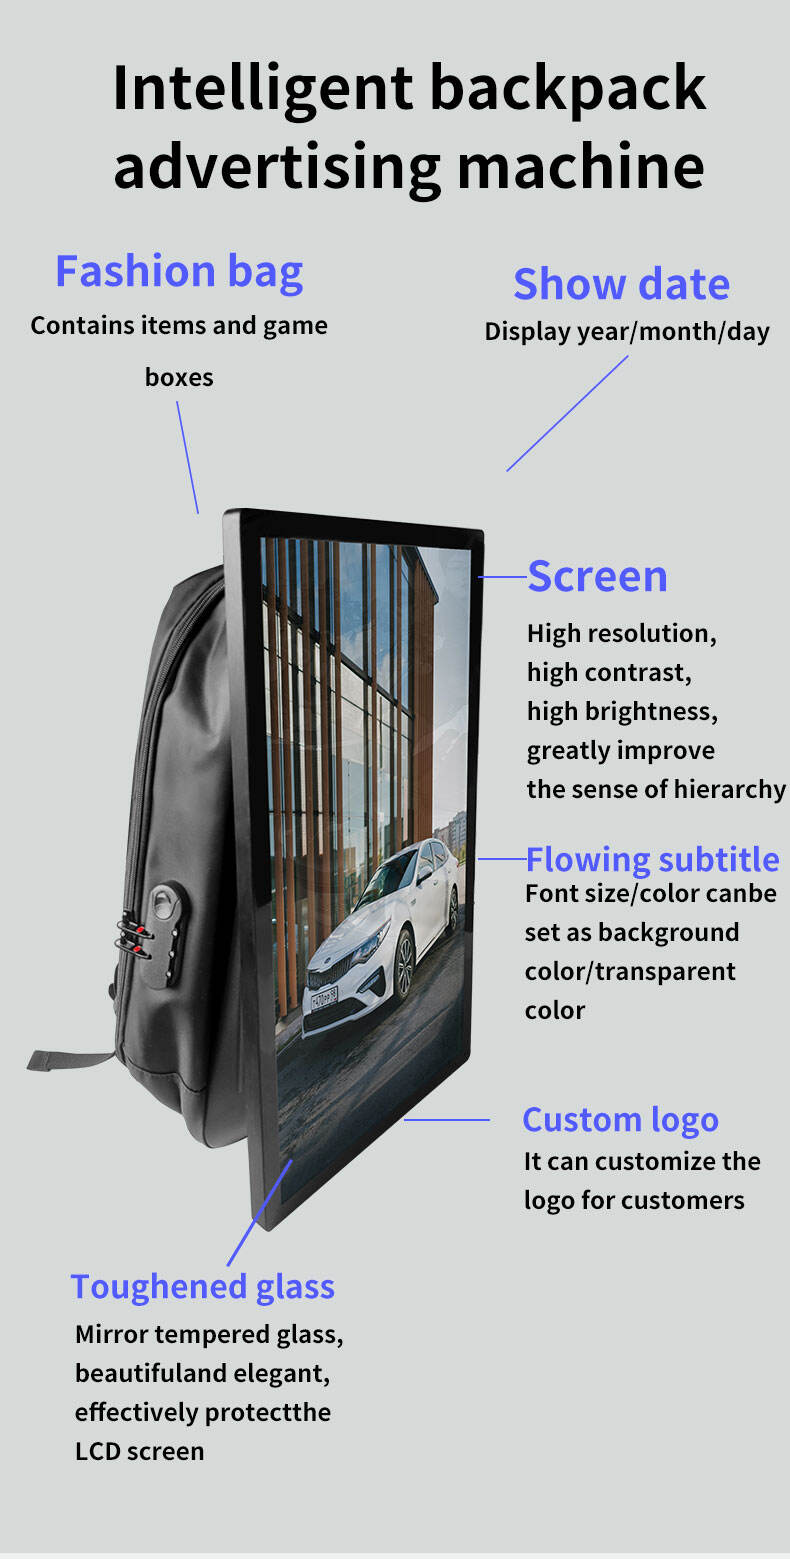 27inch LCD walking portable backpack for advertising TV Display Screens for Outdoor Digital Signage and Displays details